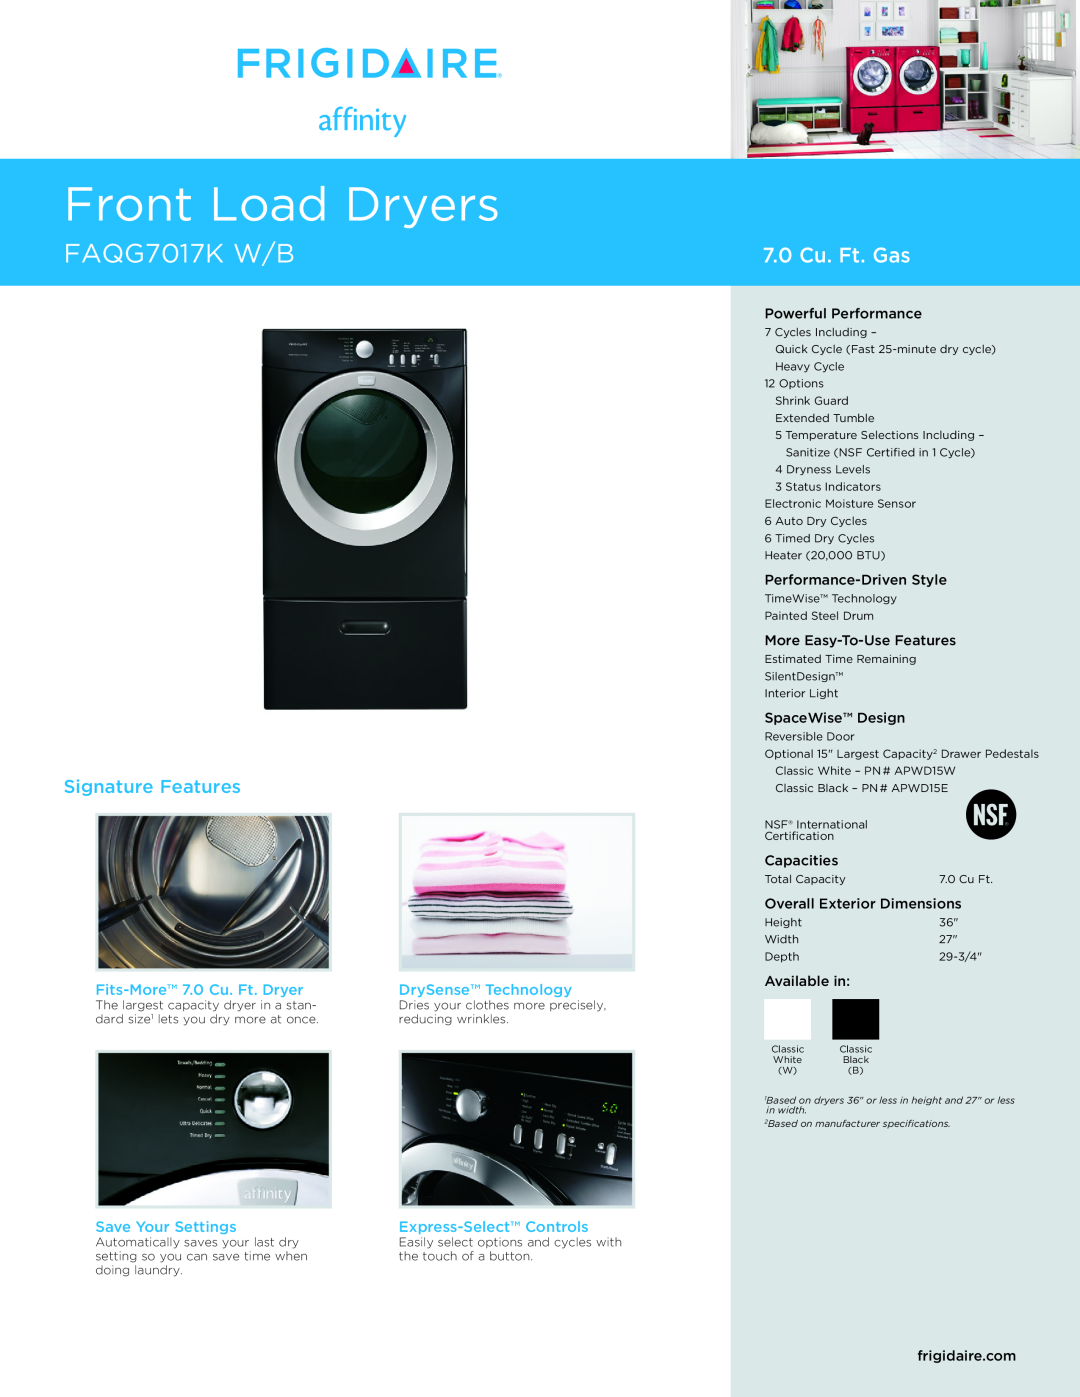 Frigidaire FAQG7017K dimensions Fits-More 7.0 Cu. Ft. Dryer, DrySense Technology, Save Your Settings, Powerful Performance 